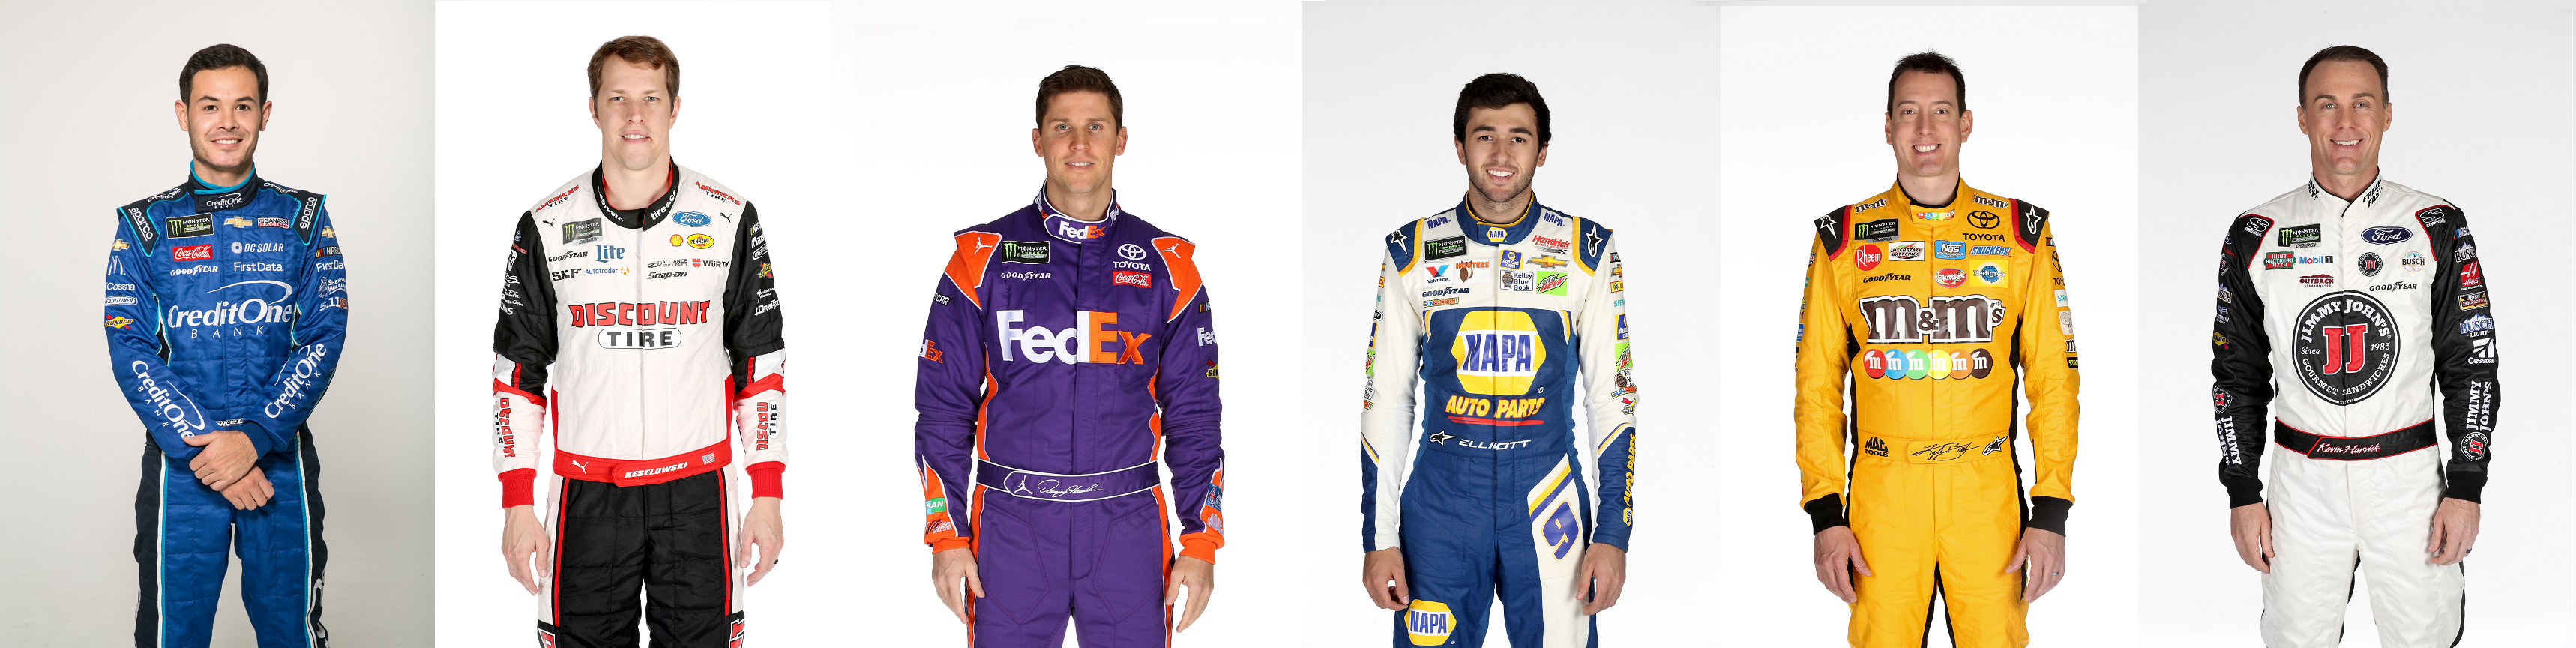 Which of these six raises their arms in victory at Daytona?